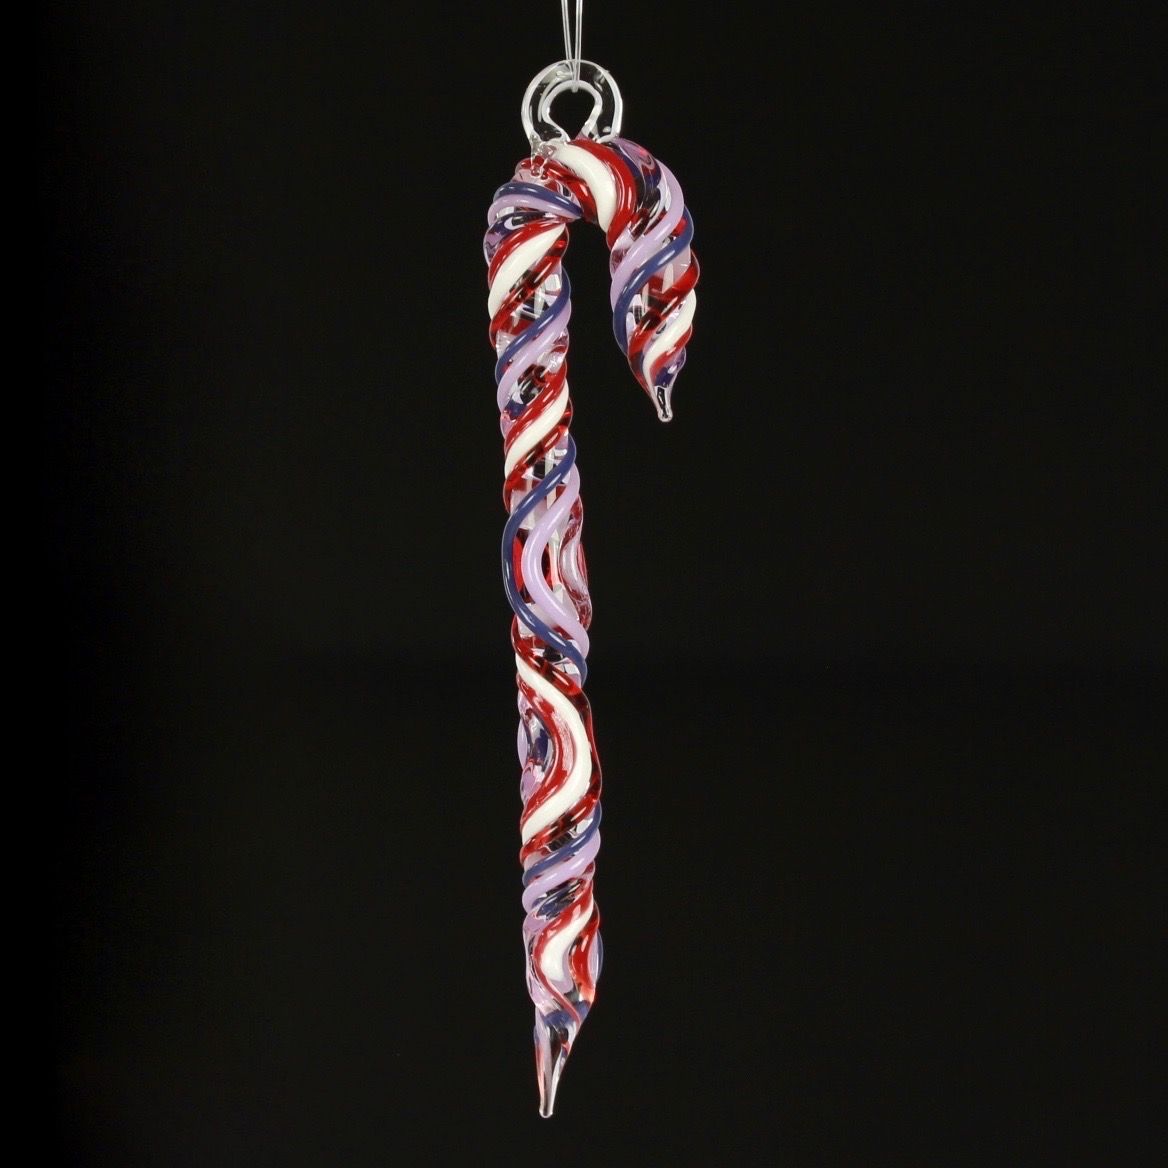 Variety Candy Cane Ornaments